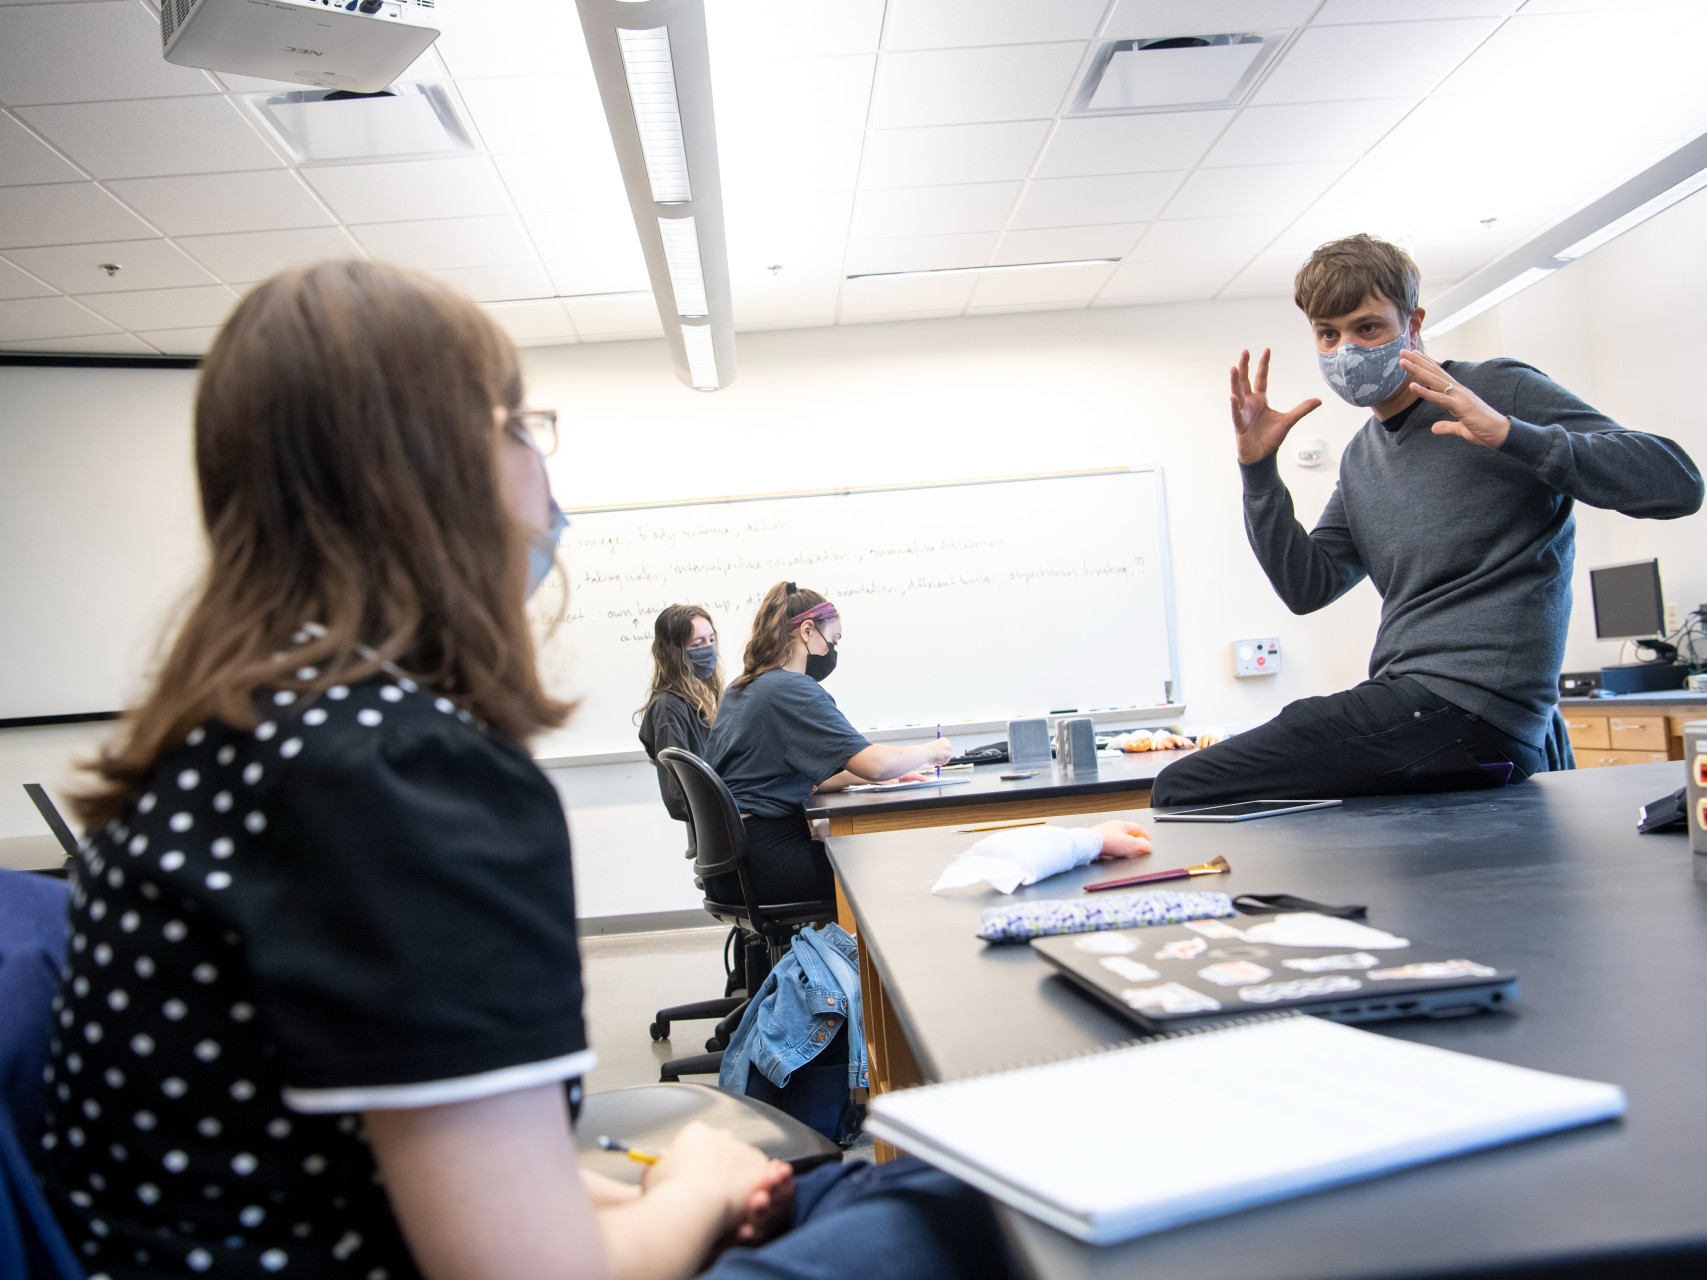 Matthieu de Wit, a neuroscience professor, engages with a student in the classroom.